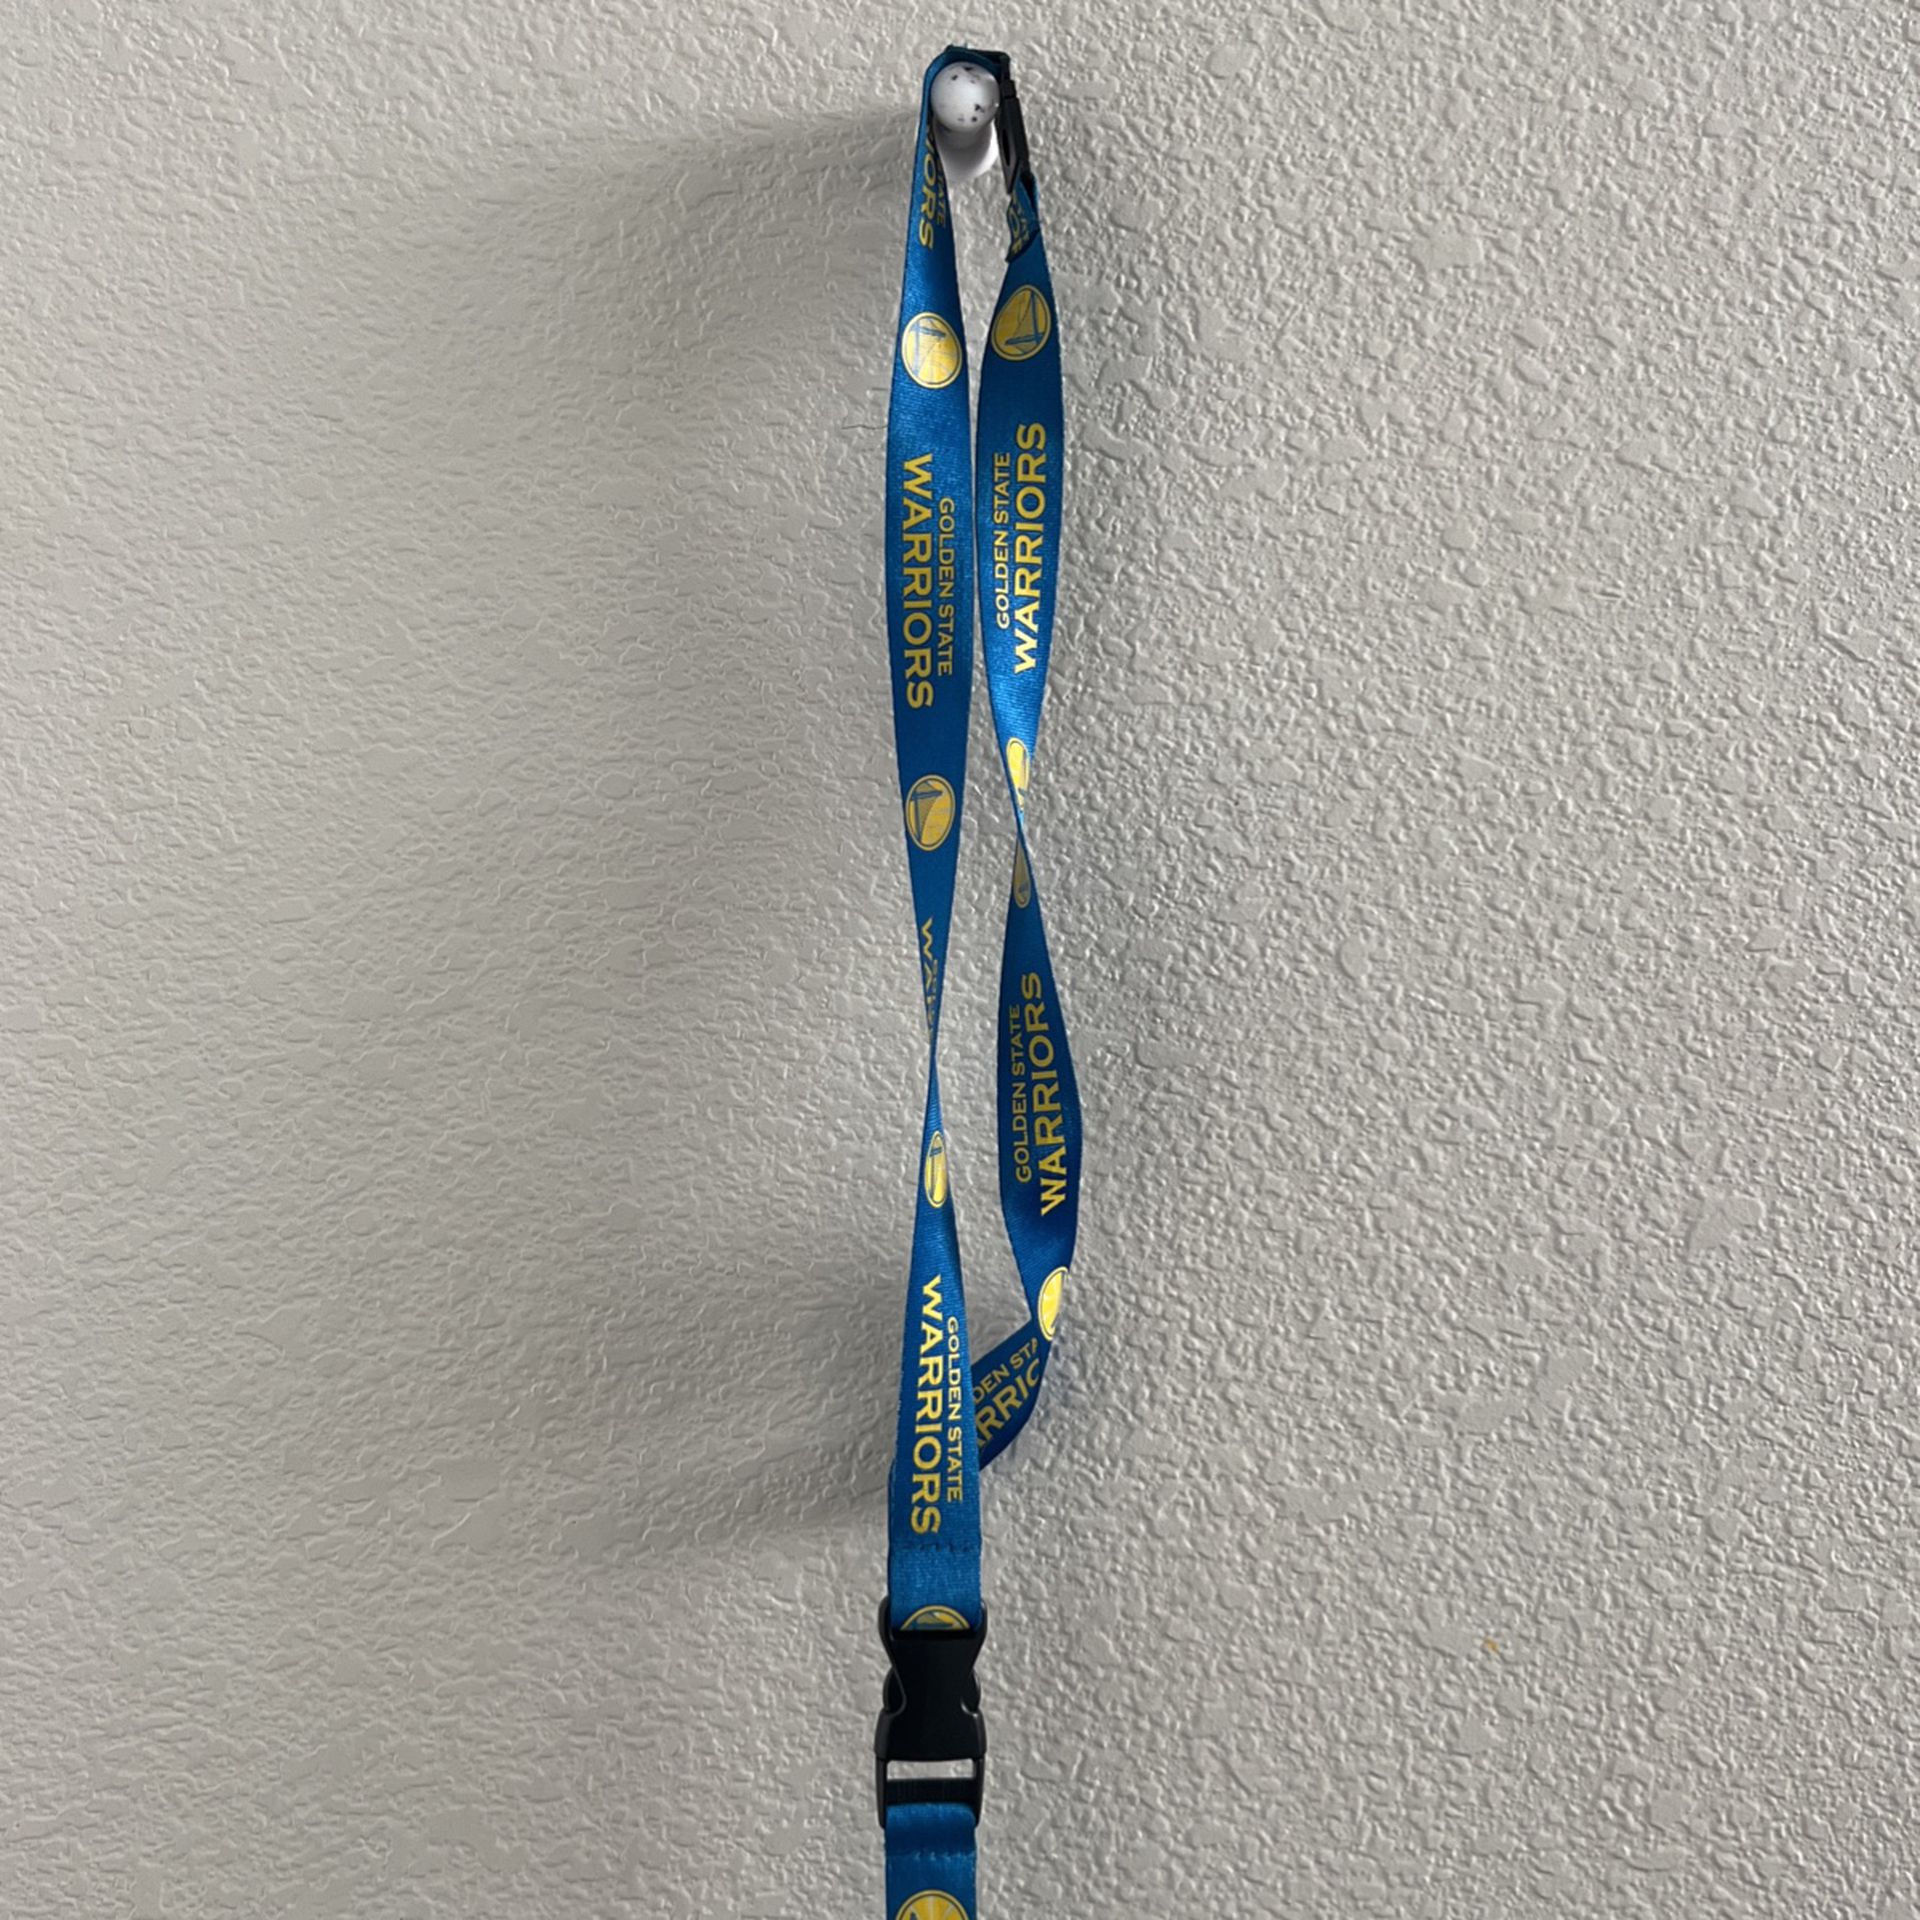 Golden State Warriors Lanyard for Sale in Roseville, CA - OfferUp